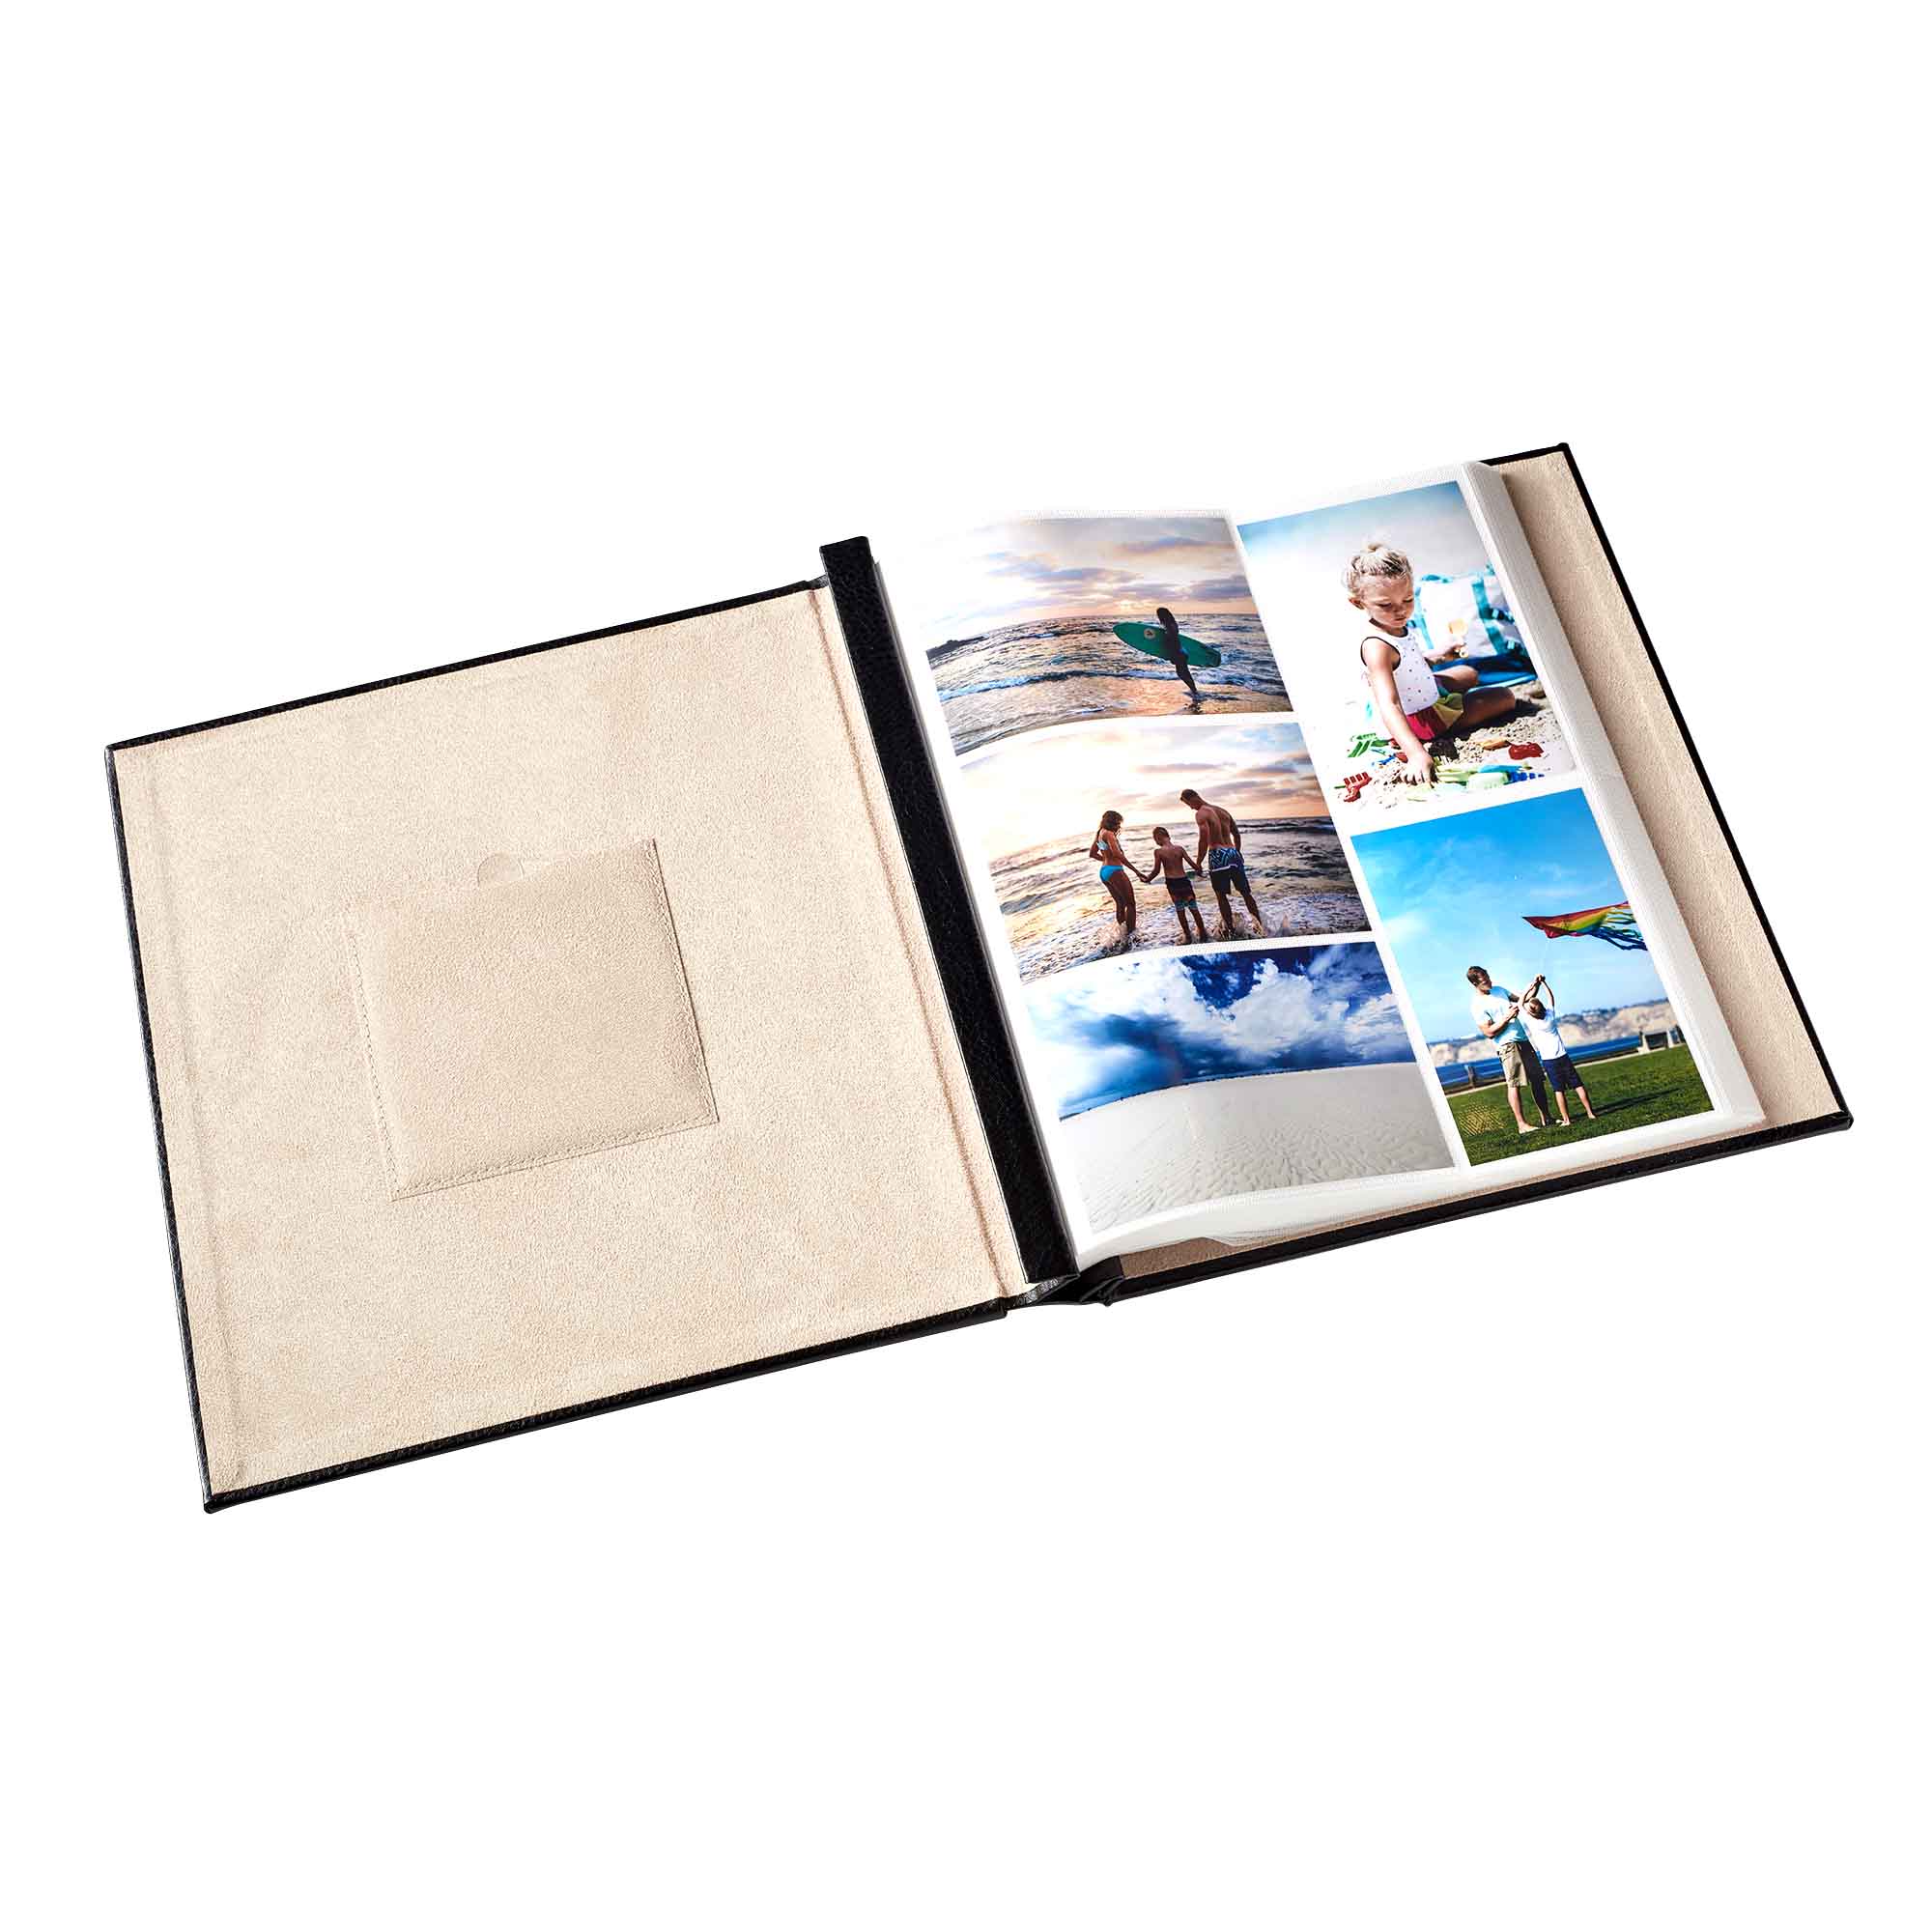 Old Town Large Photo Albums, Holds 400 4x6 Photos (Leather, Black 